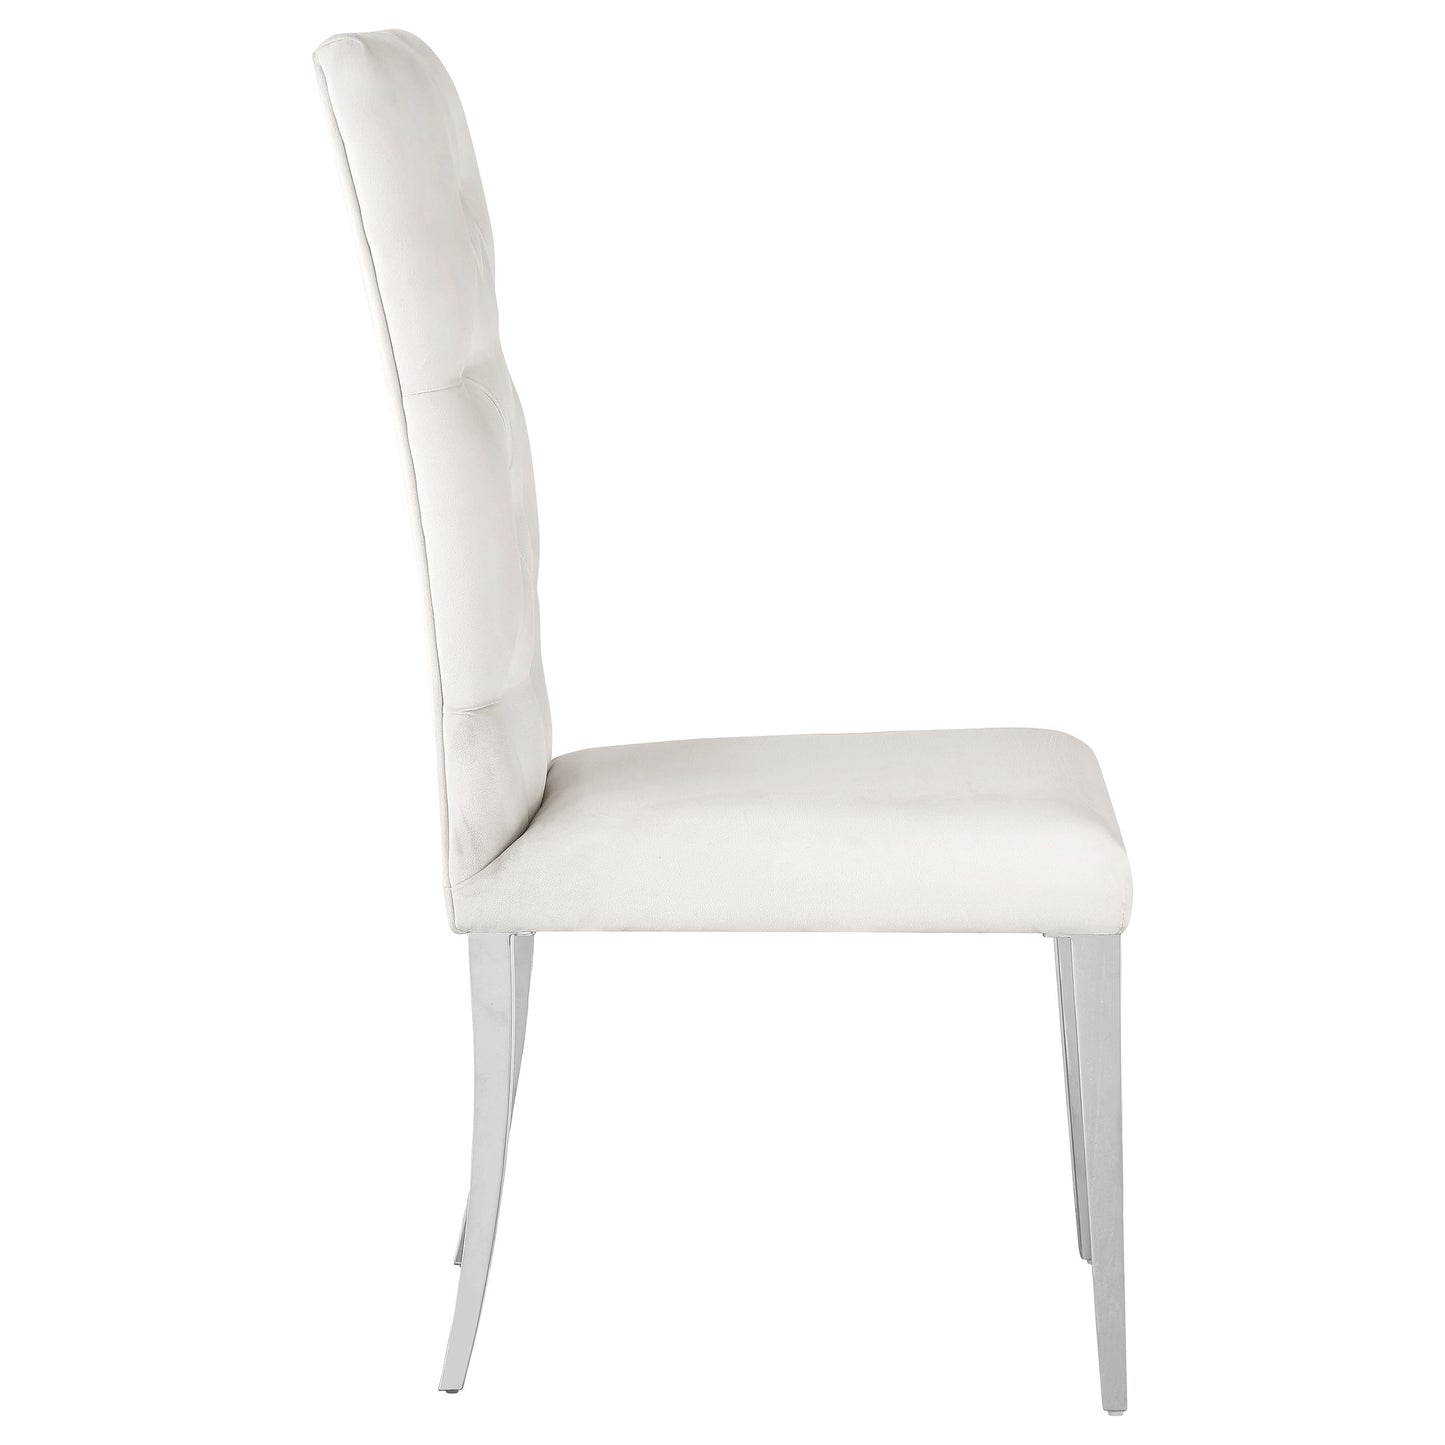 Kerwin Tufted Upholstered Side Chair (Set of 2) White and Chrome